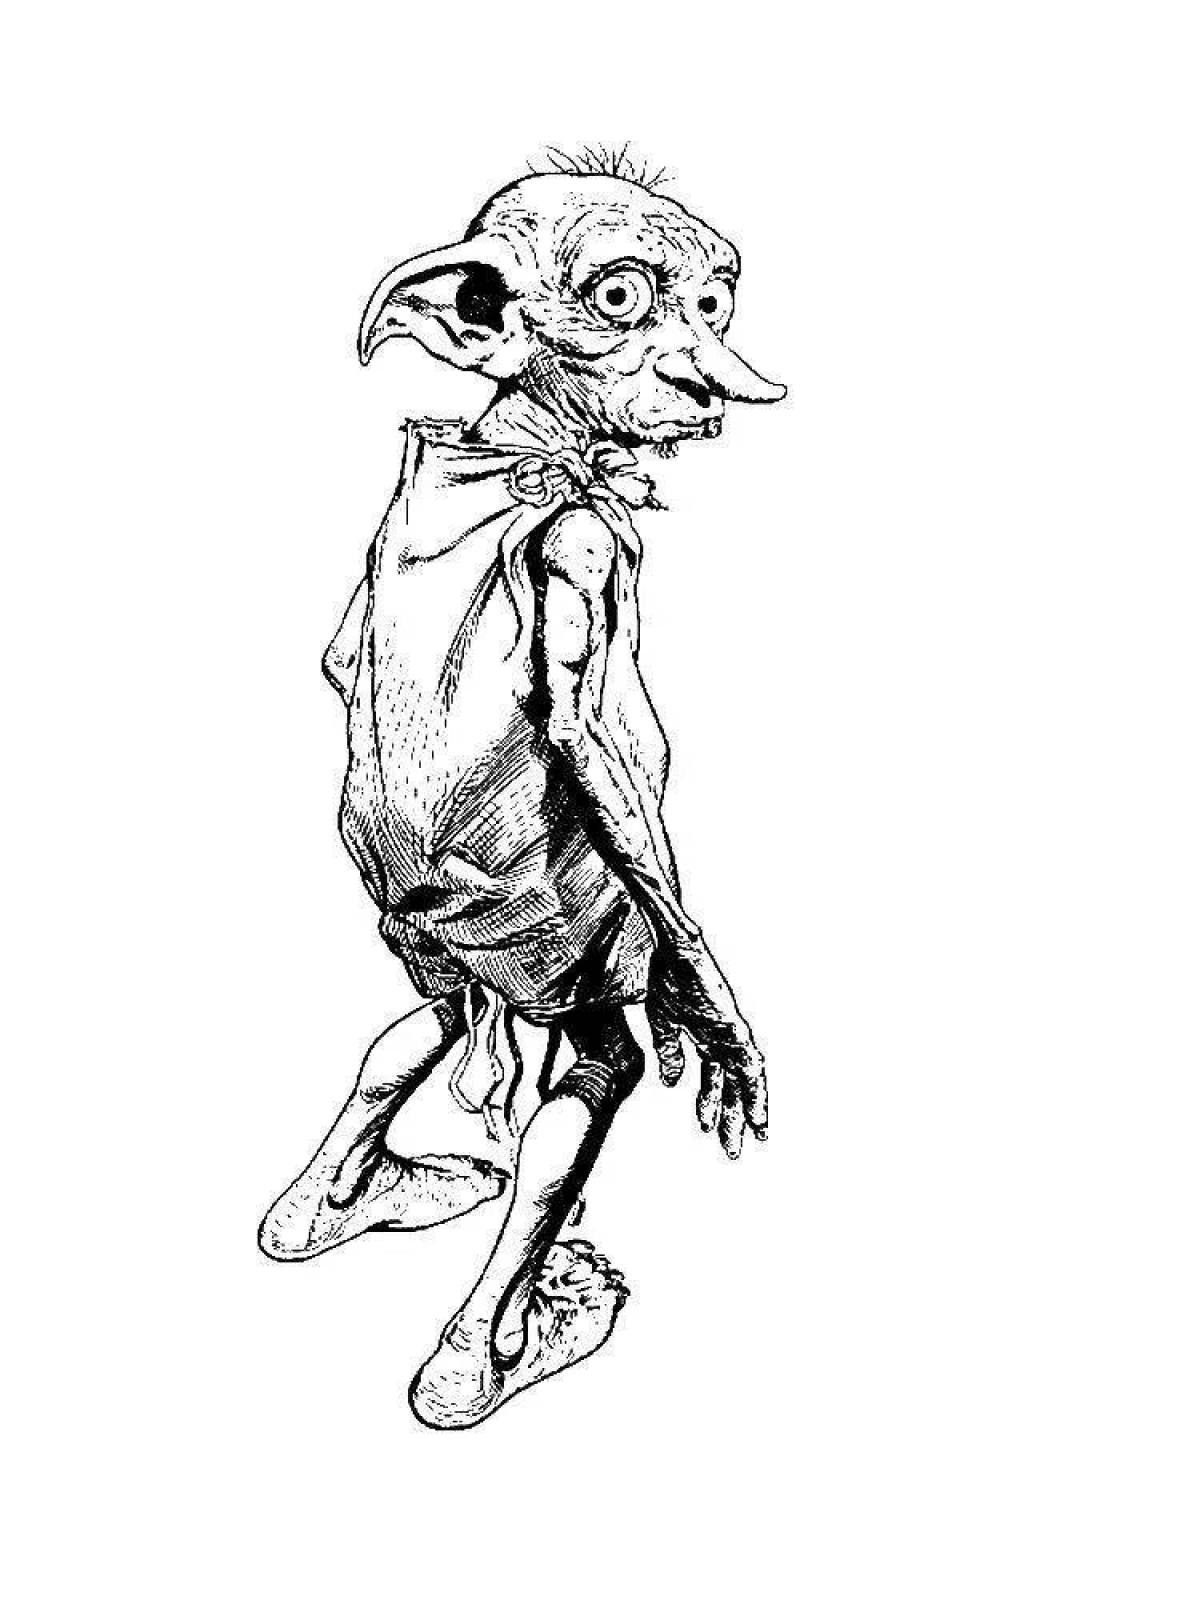 Dobby funny coloring book